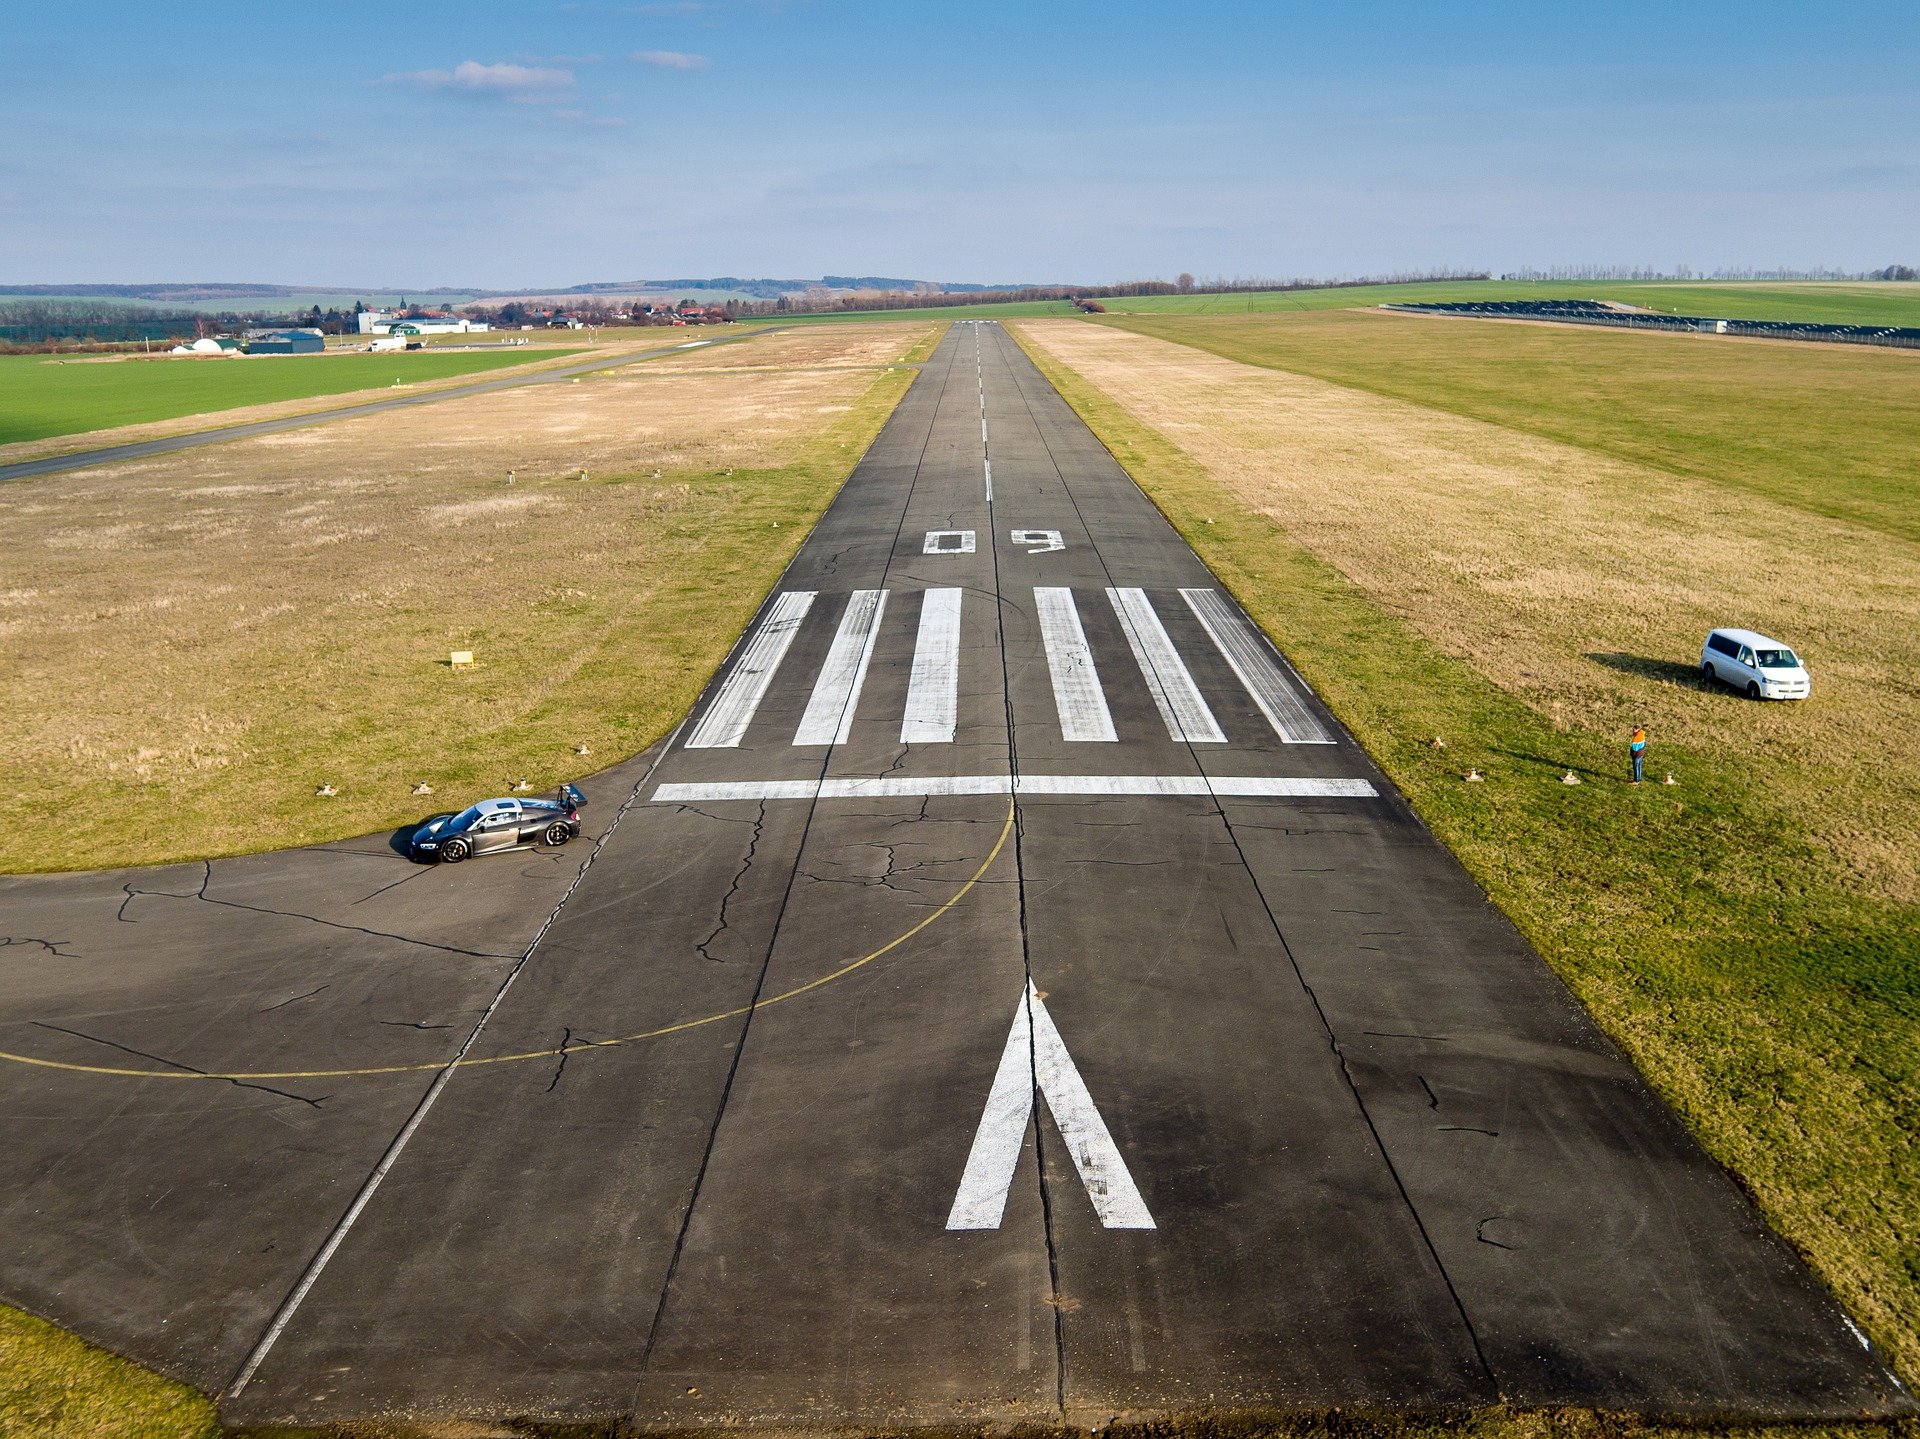 A picture which shows the runway | Source: Pixabay